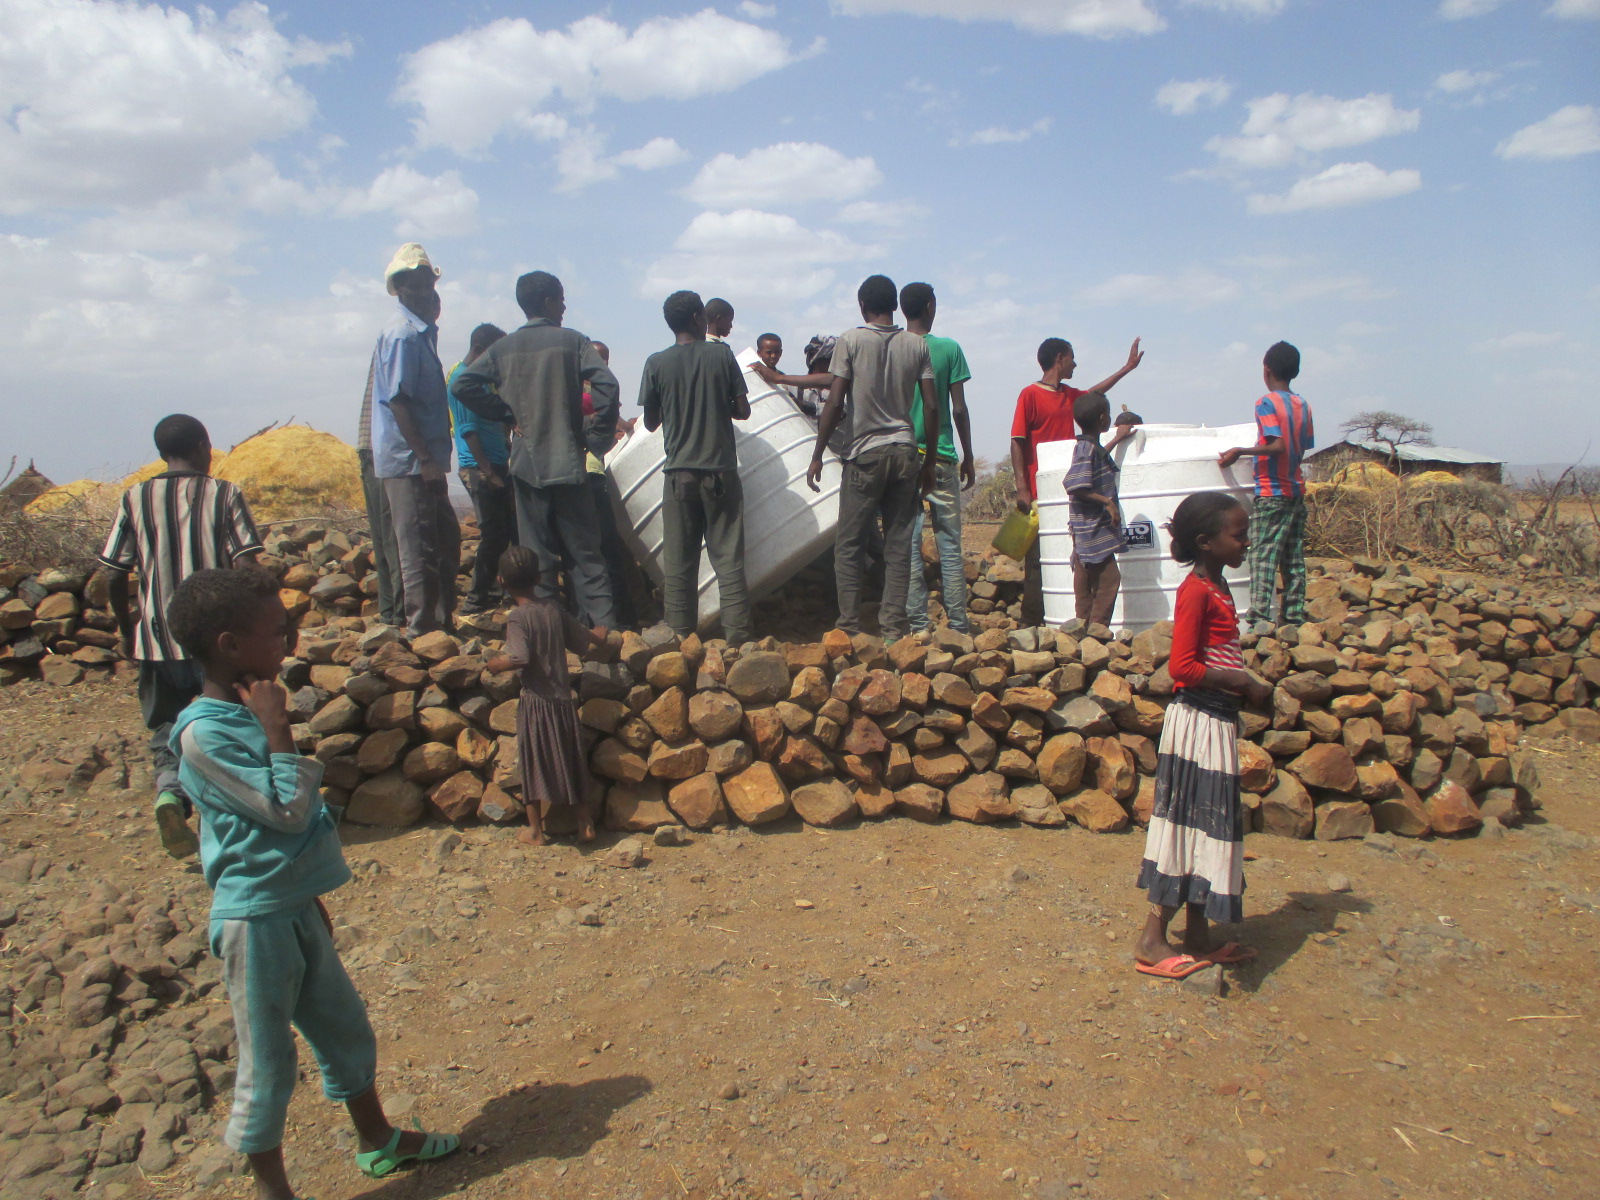 With the help of Ethiopia Reads, we brought in two water tanks to Zemene's village to help store water.